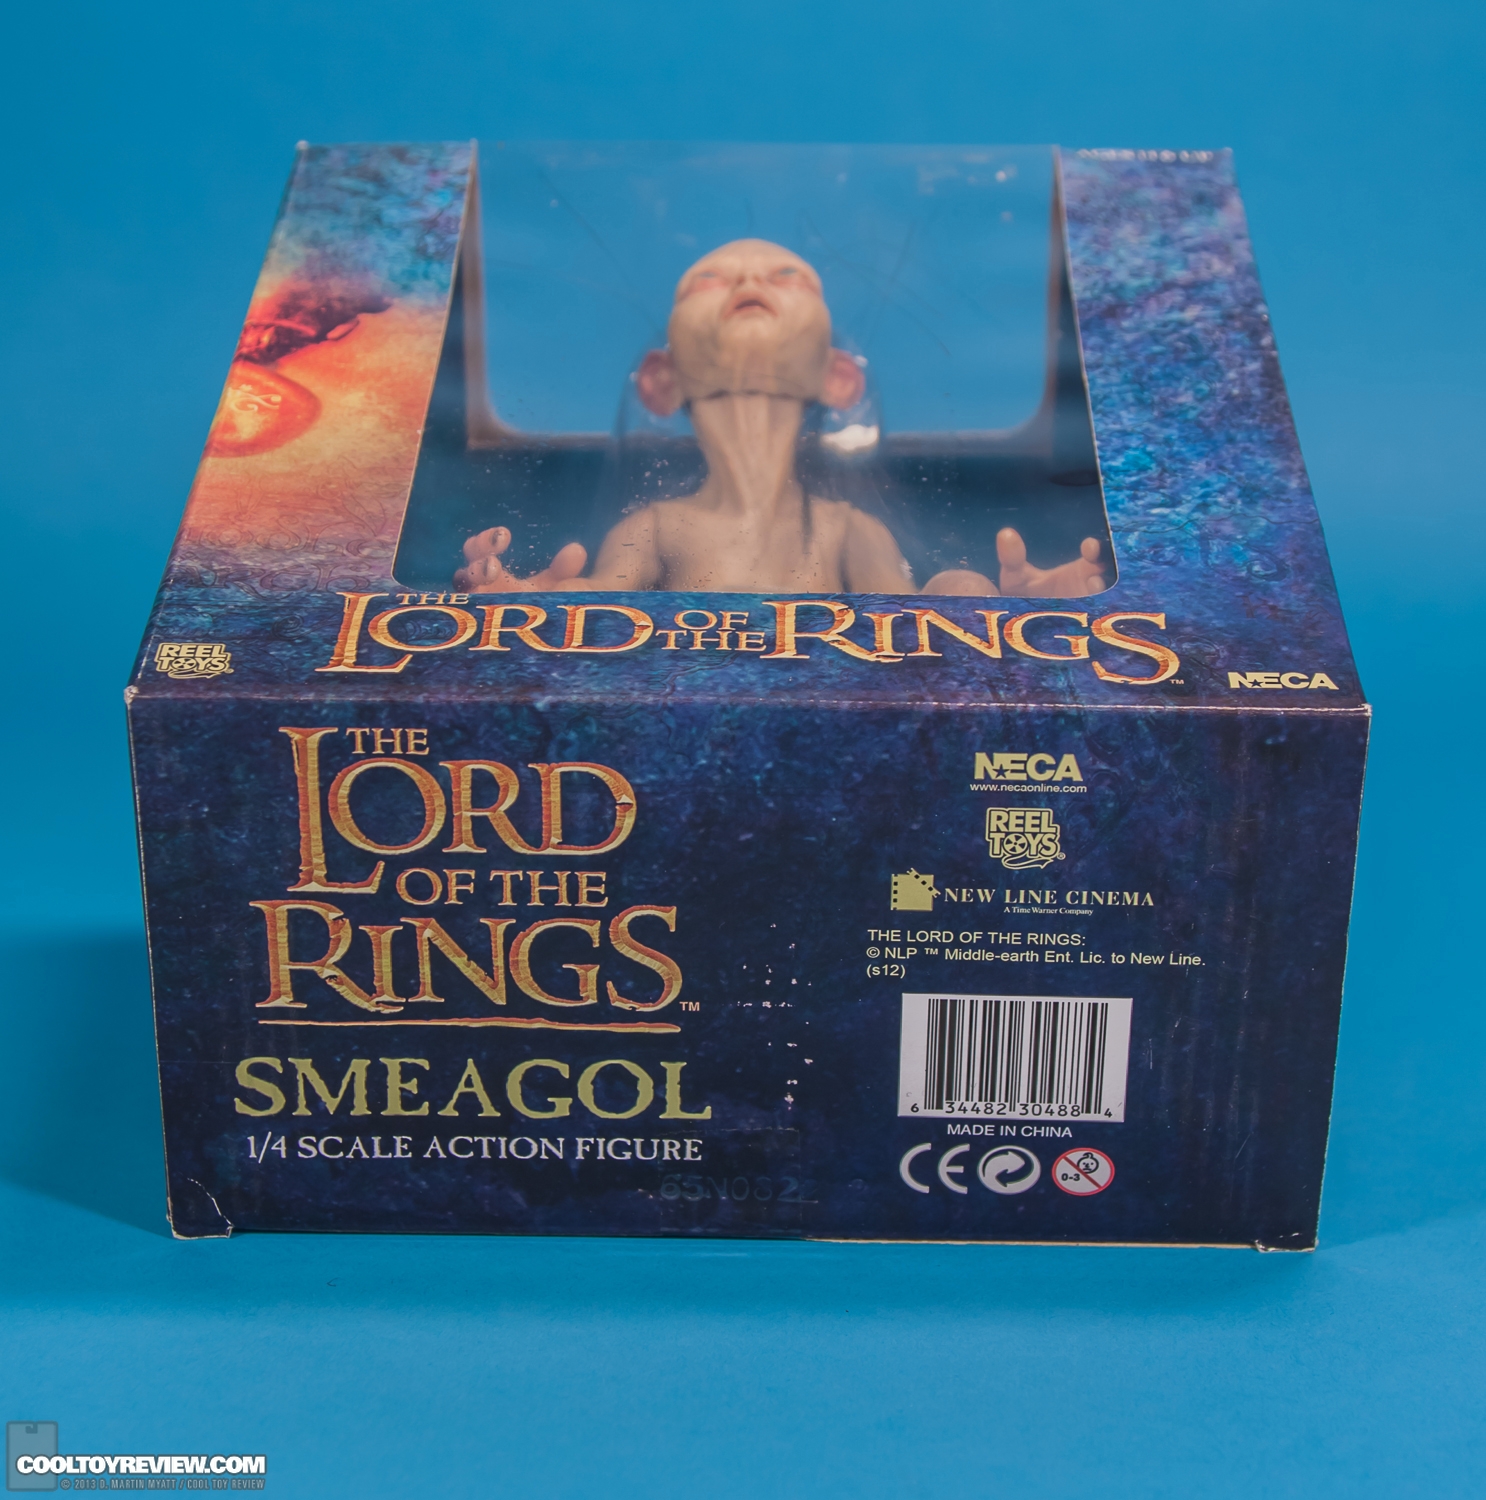 Smeagol_Lord_Of_The_Rings_NECA-020.jpg